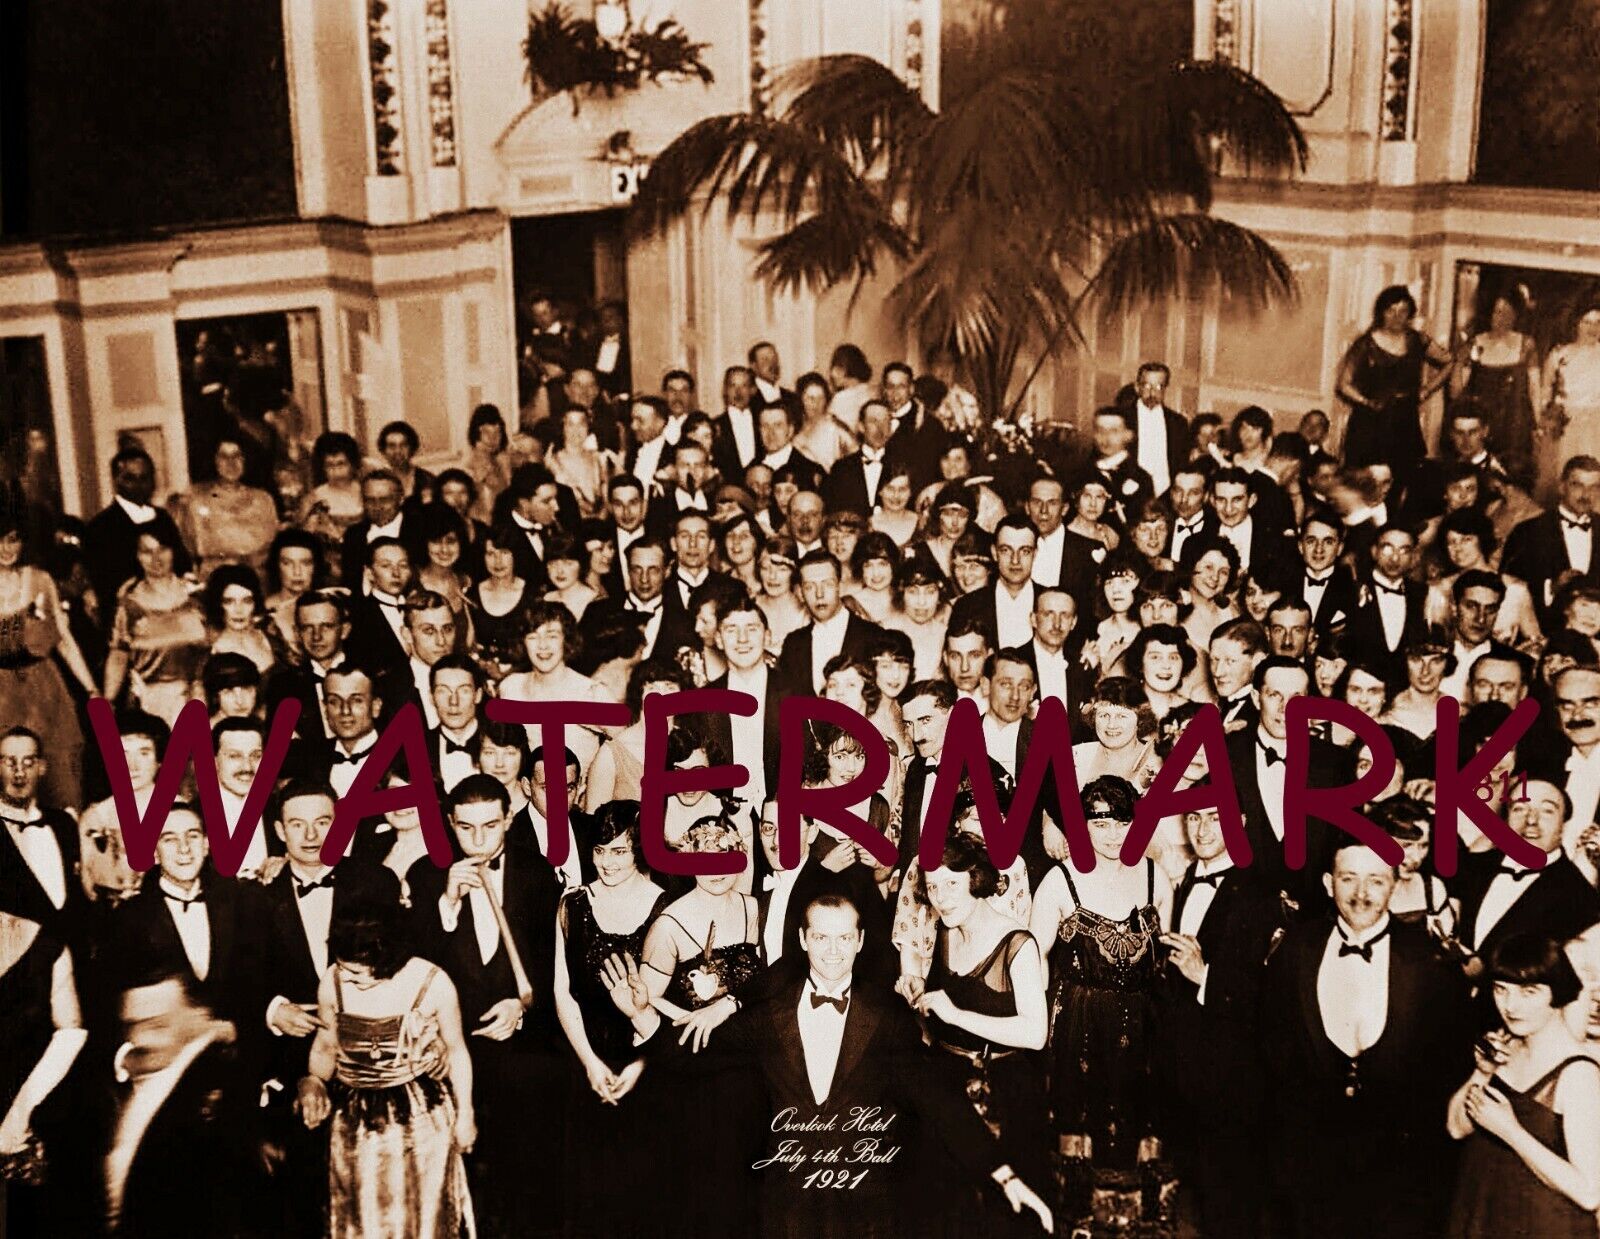 The Overlook Hotel Ballroom The Shining With Frame Options PUBLICITY PHOTO  